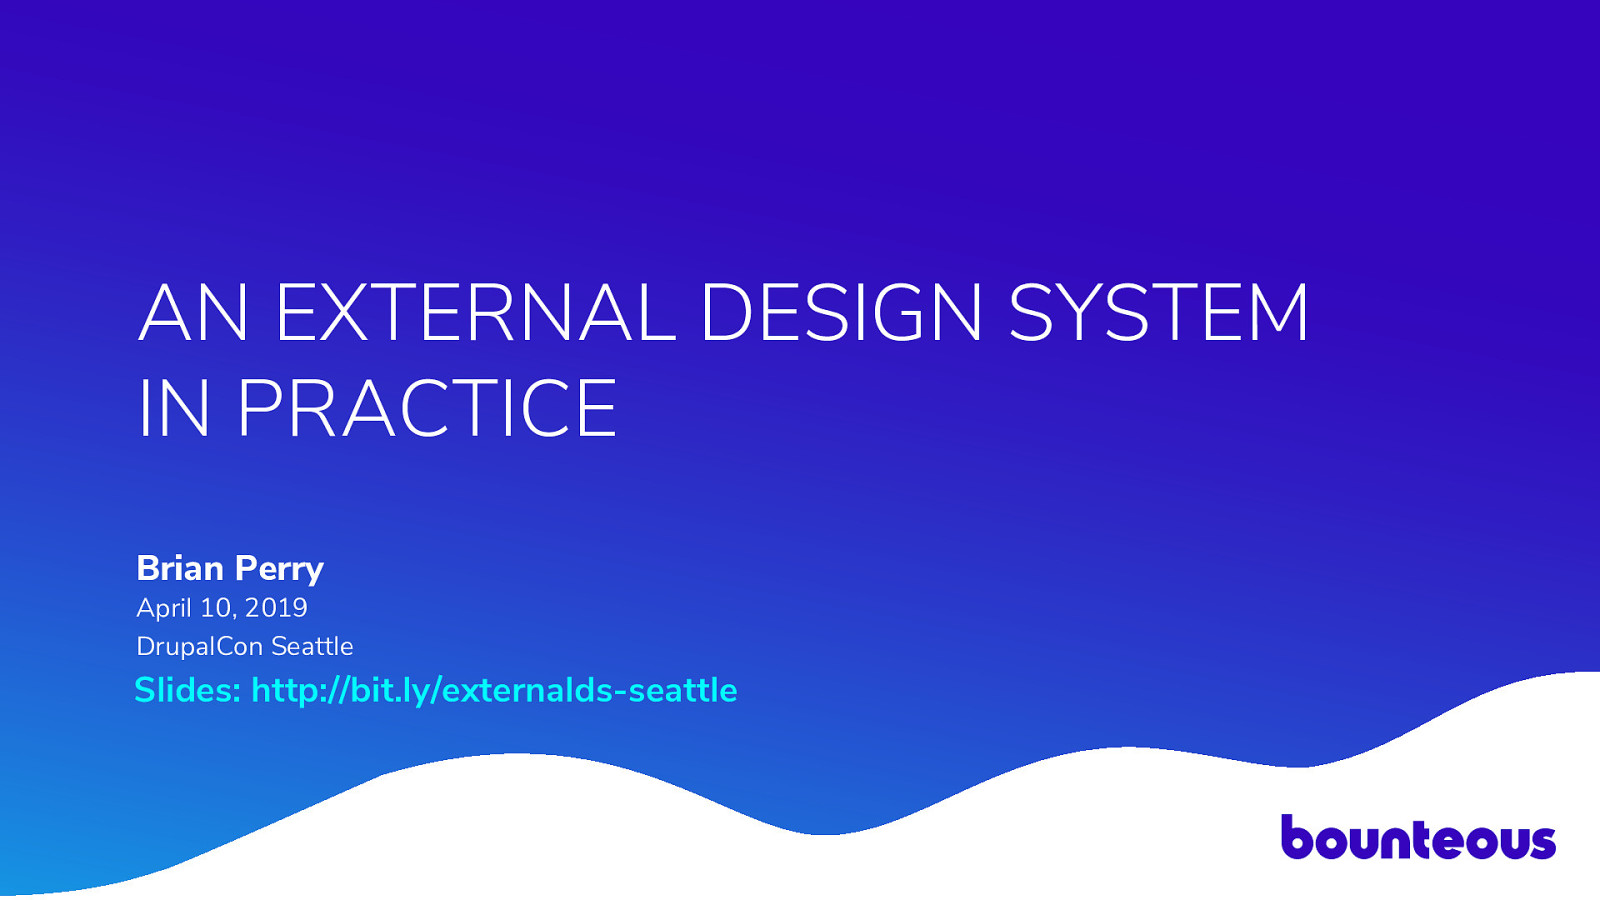 An External Design System in Practice